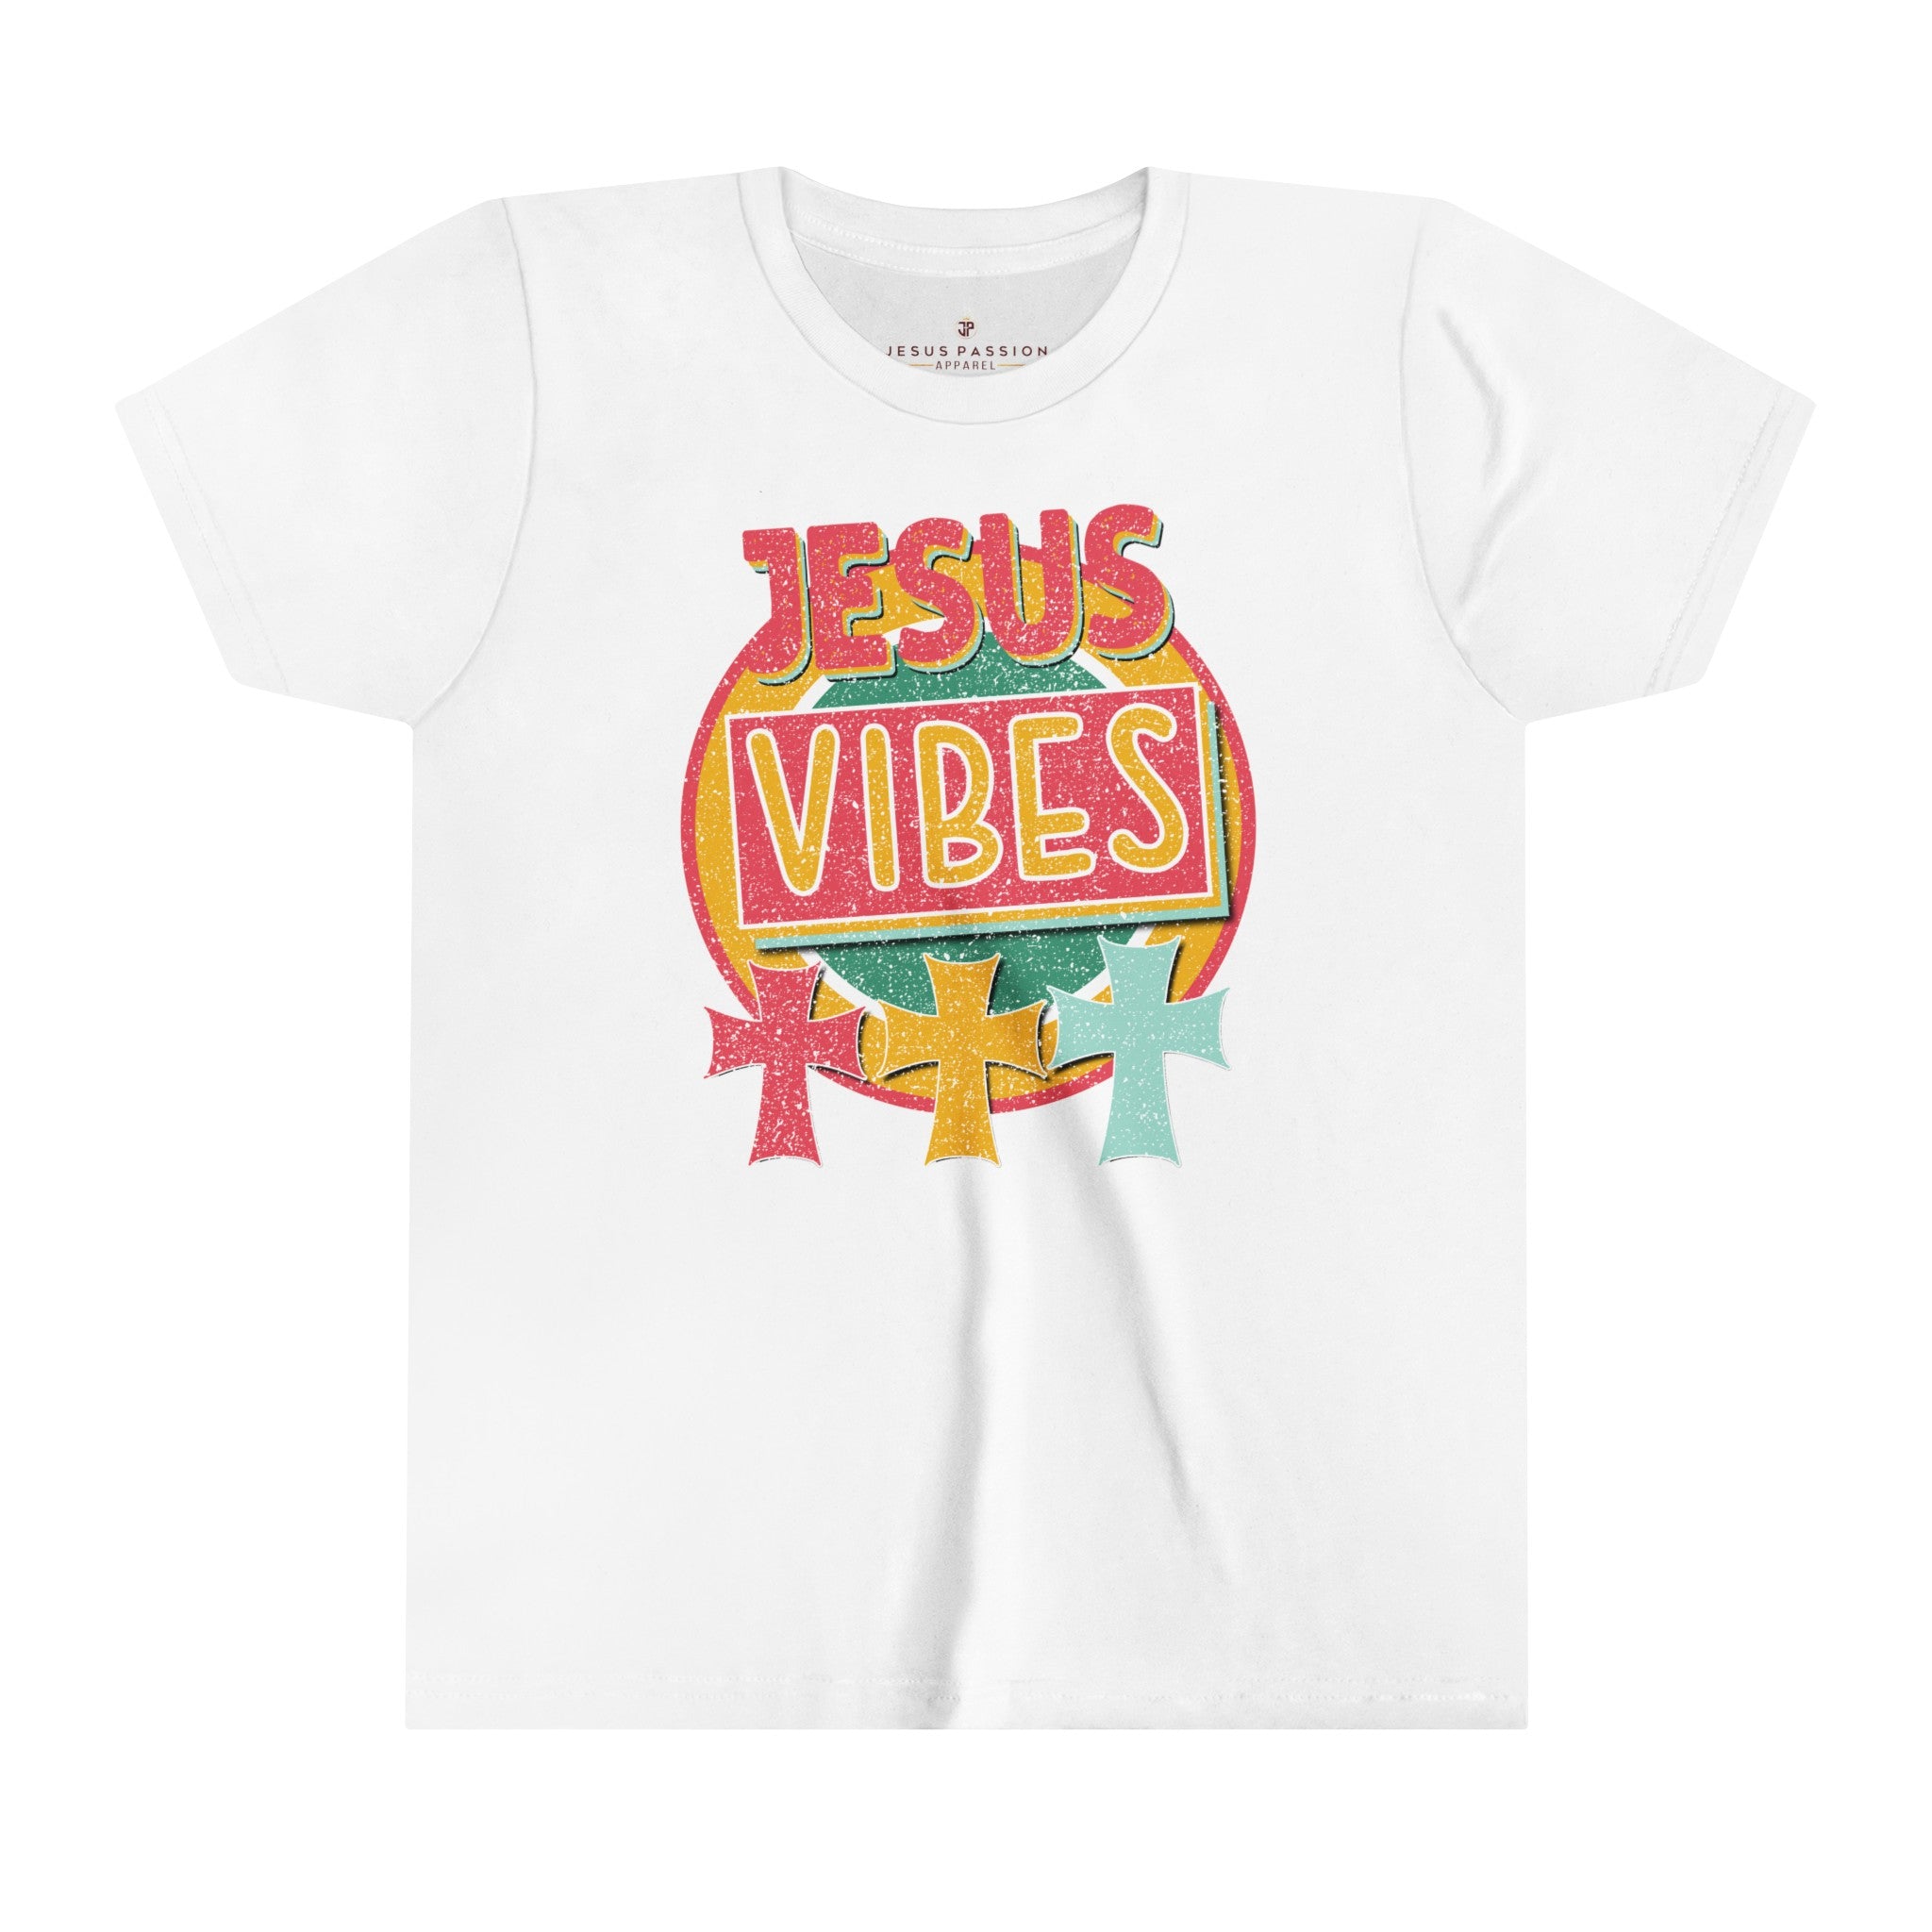 Jesus Vibes Retro-Inspired Youth Relaxed-Fit T-Shirt Colors: White Sizes: S Jesus Passion Apparel